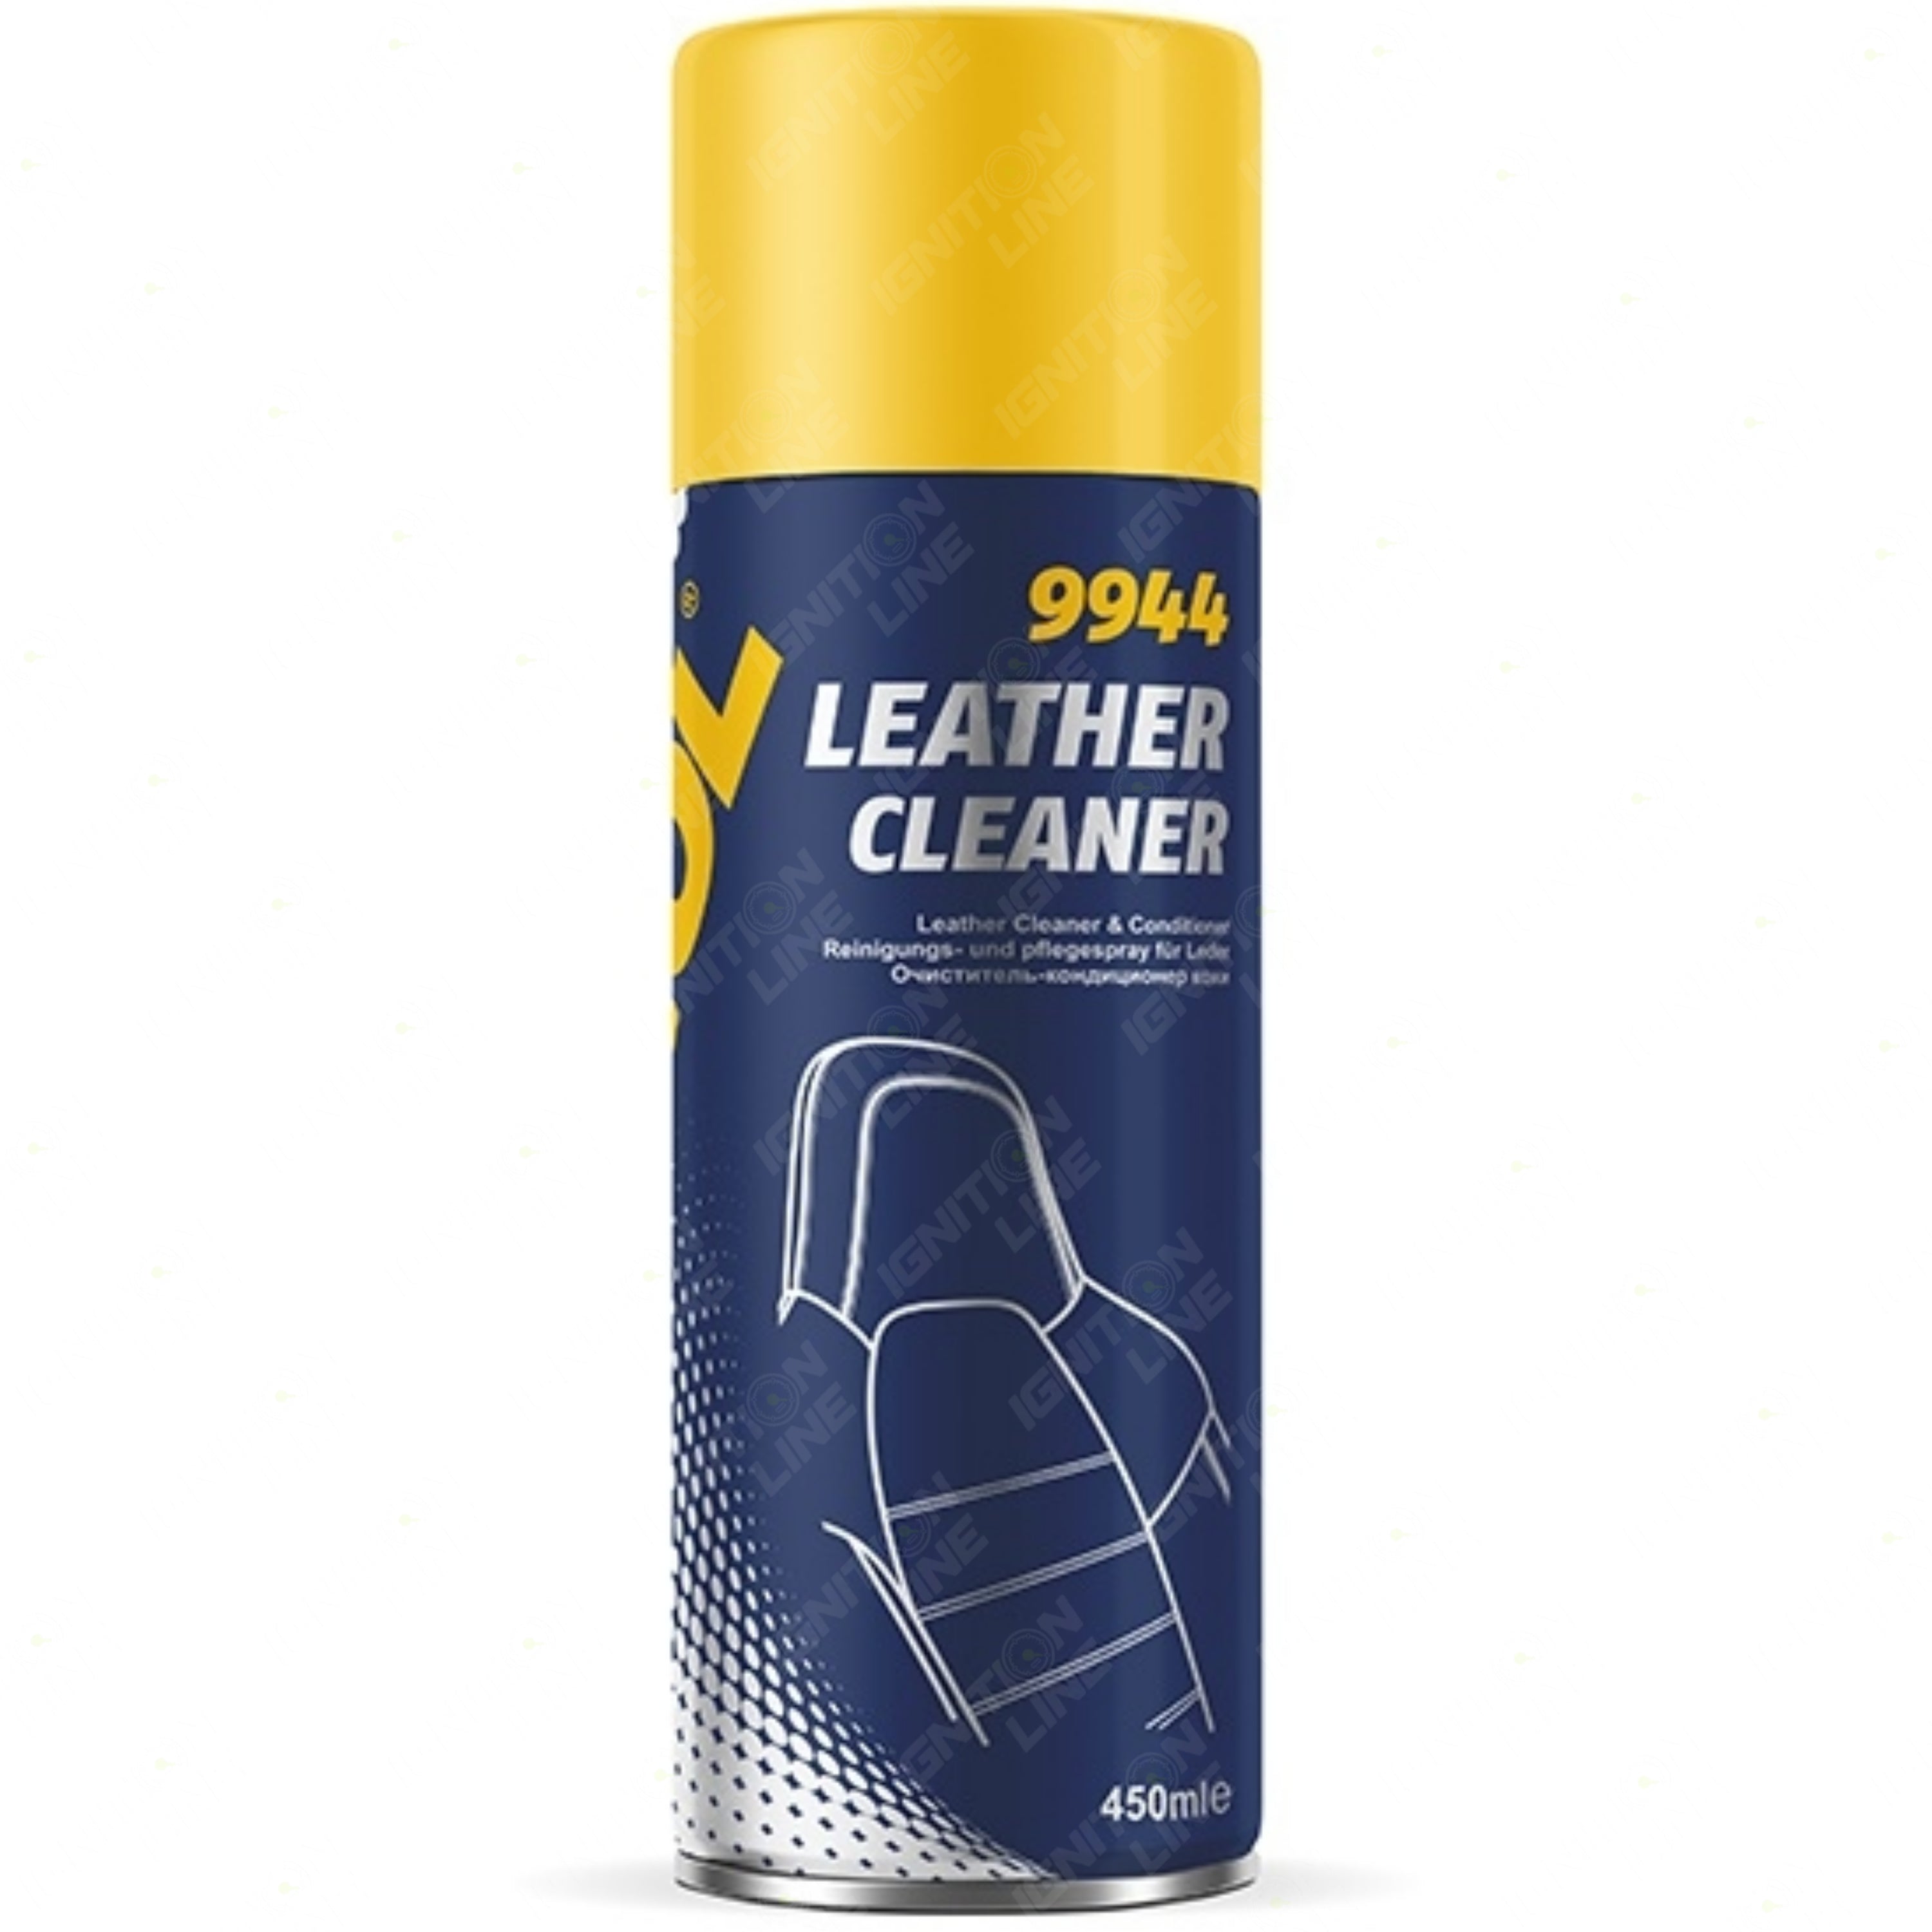 MANNOL Leather Cleaner 450ml